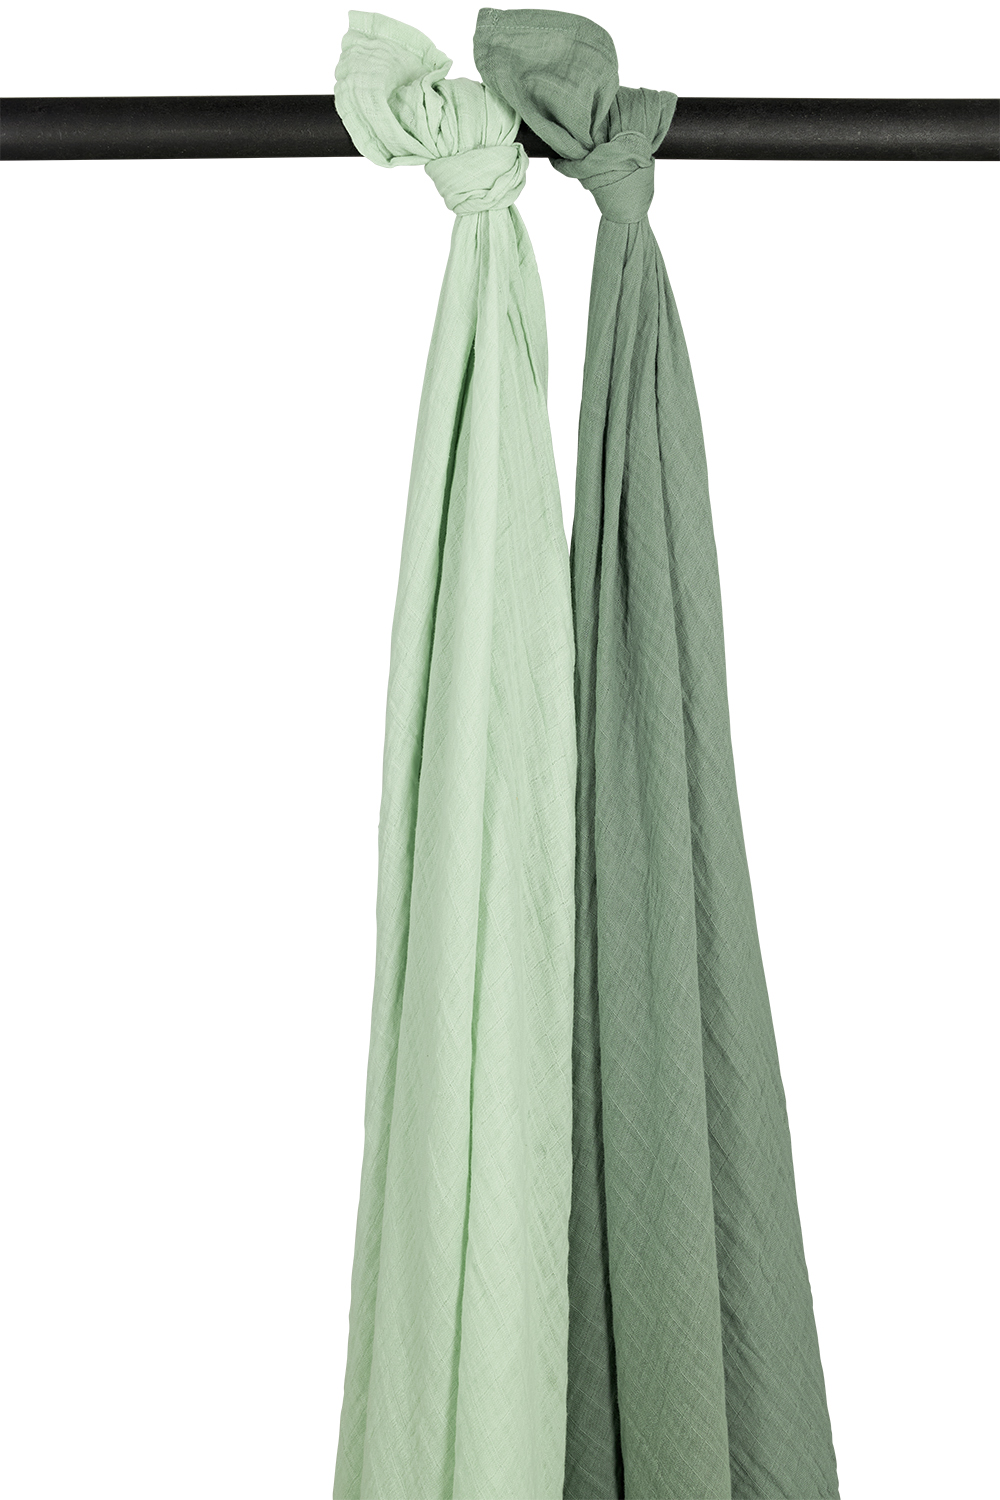 Swaddle 2-pack pre-washed muslin Uni - soft green/forest green - 120x120cm